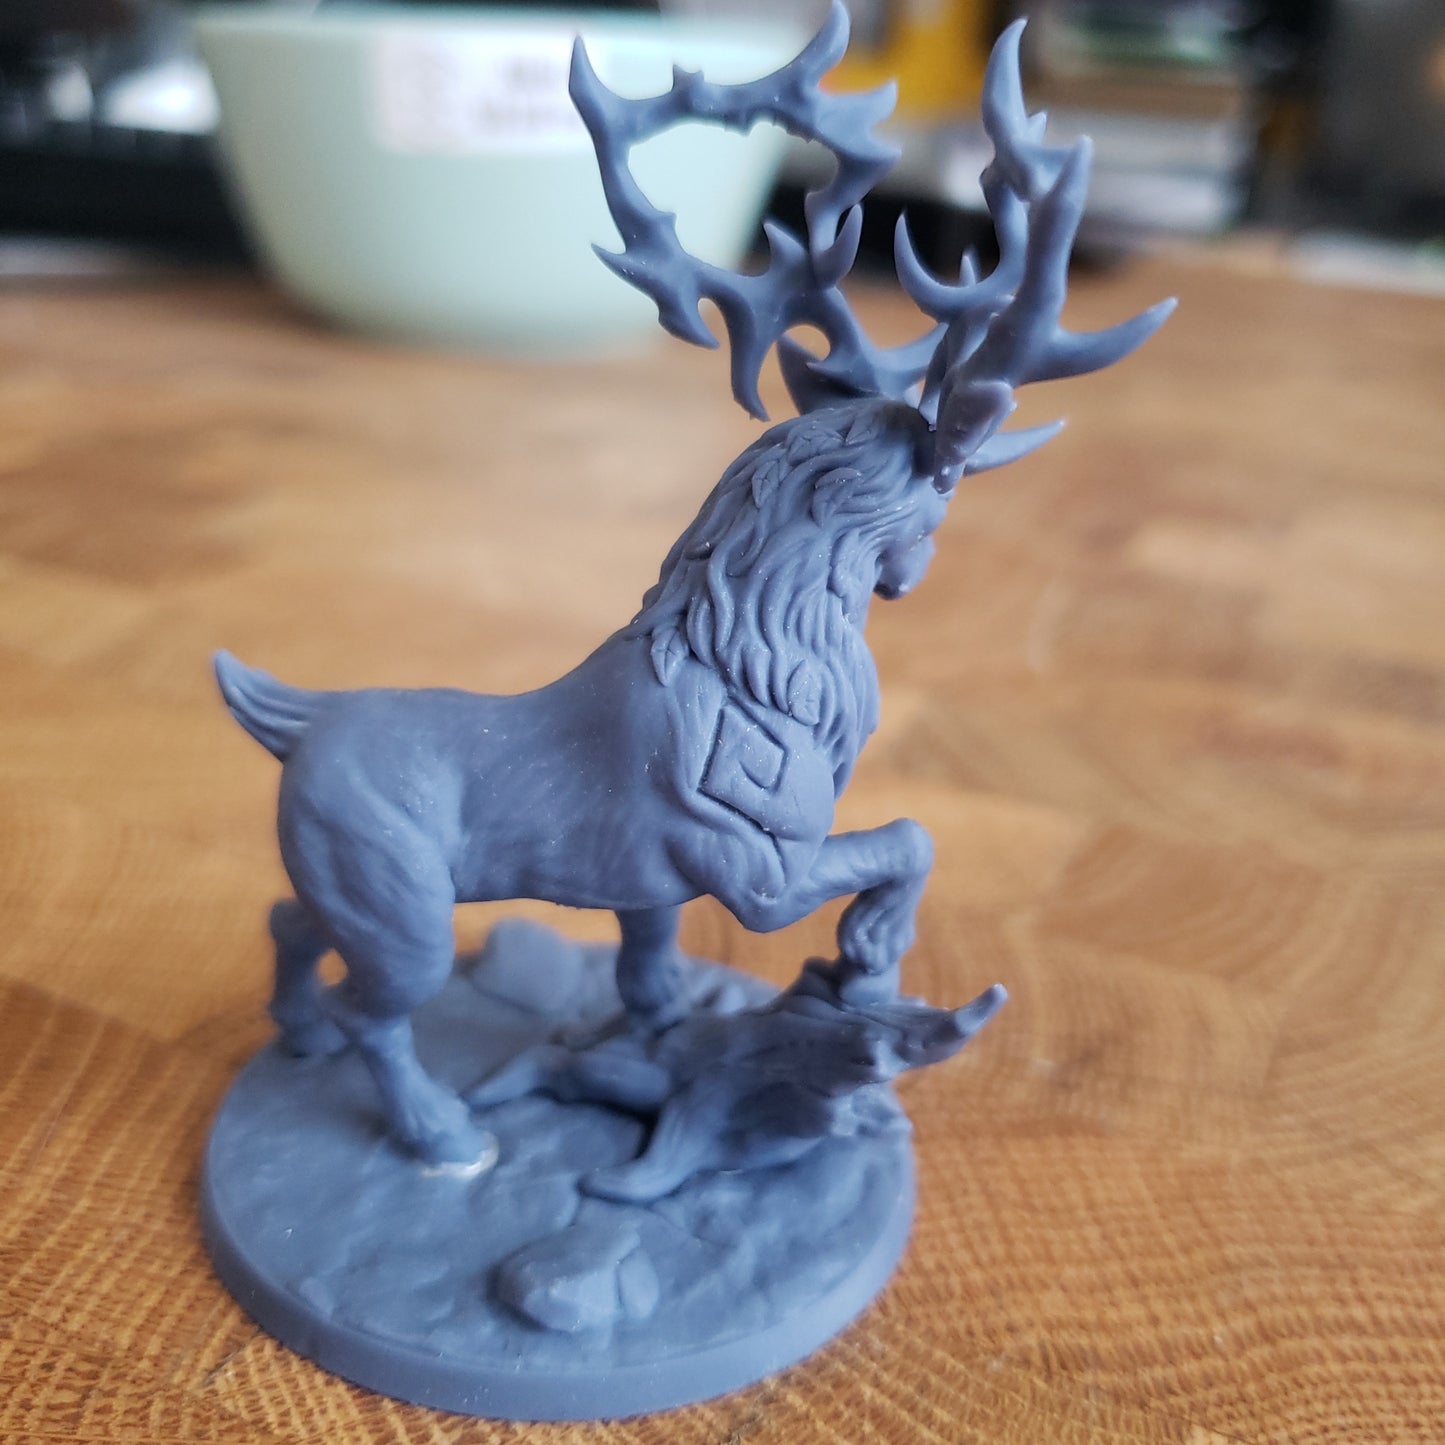 Image shows an example of a 3D printed wild stag gaming miniature printed in-house at All Systems Go